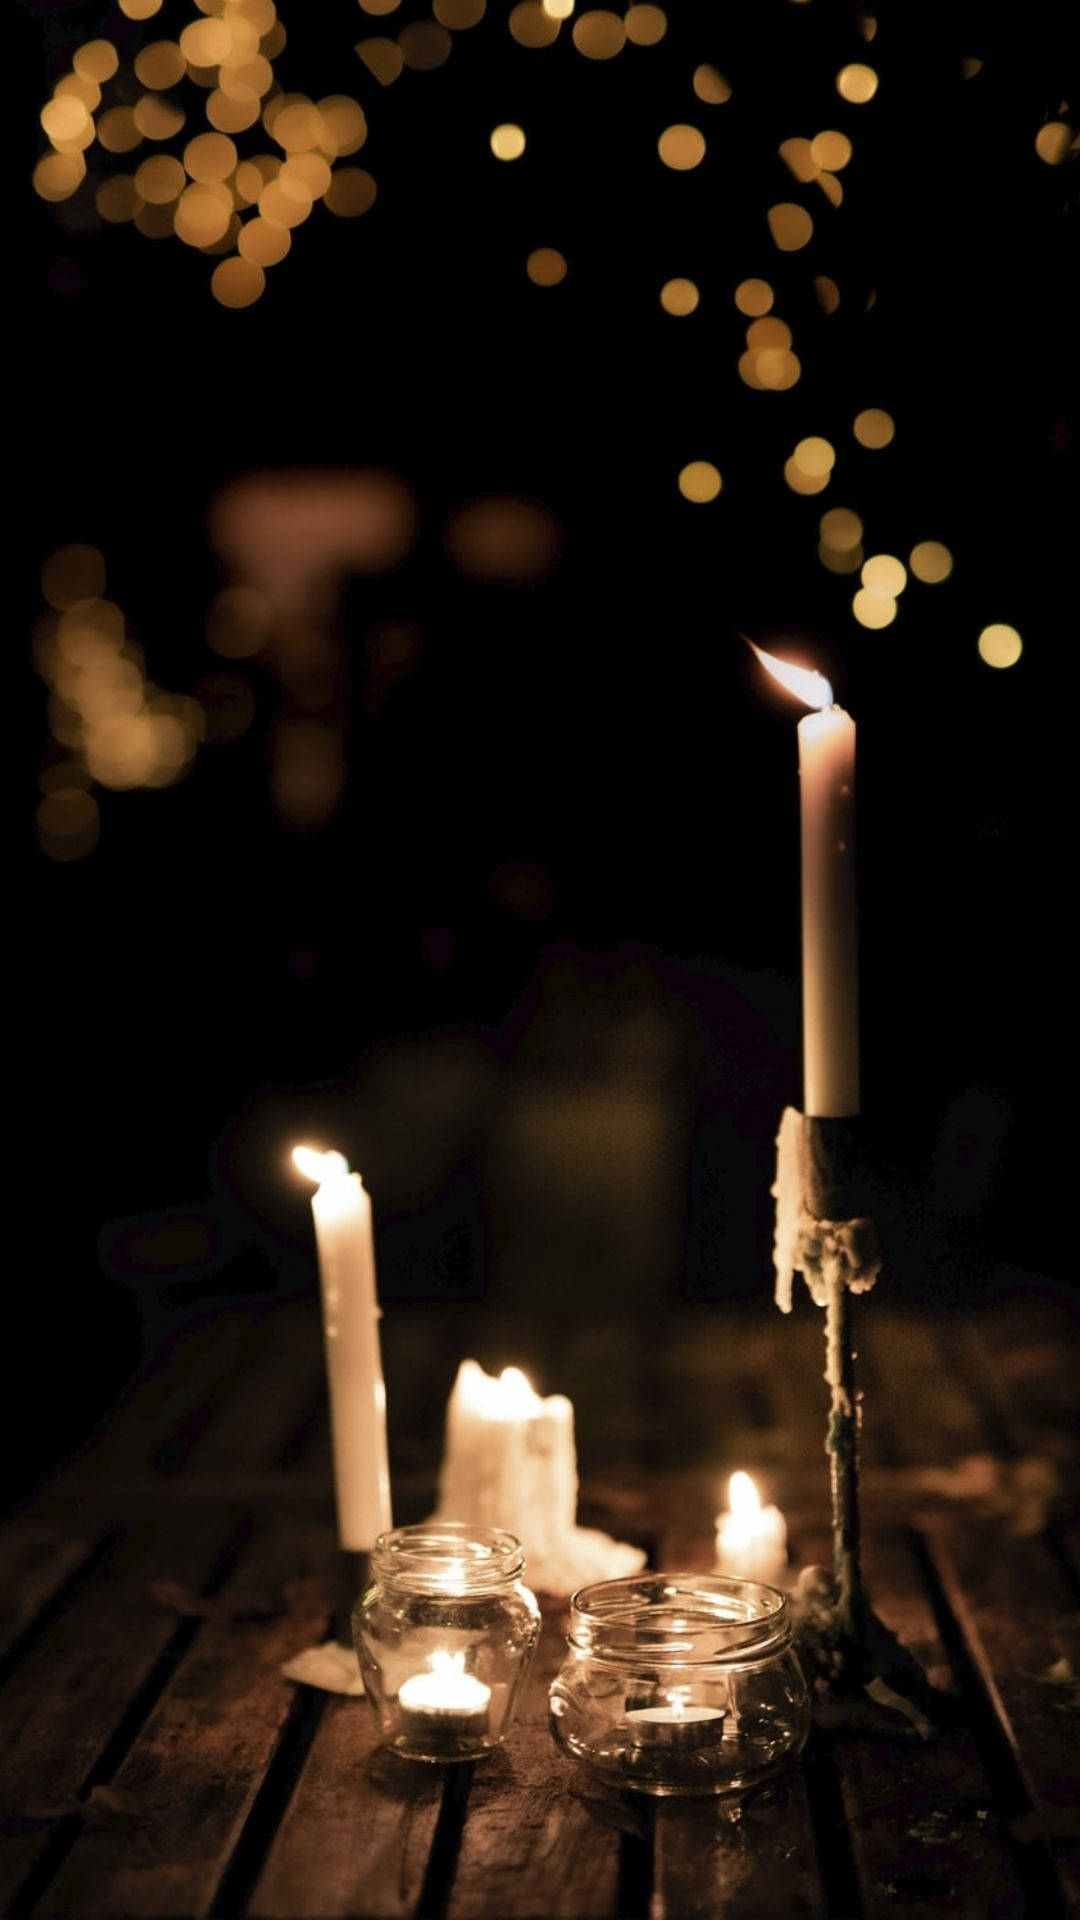 Glowing Candles In The Dark Wallpaper